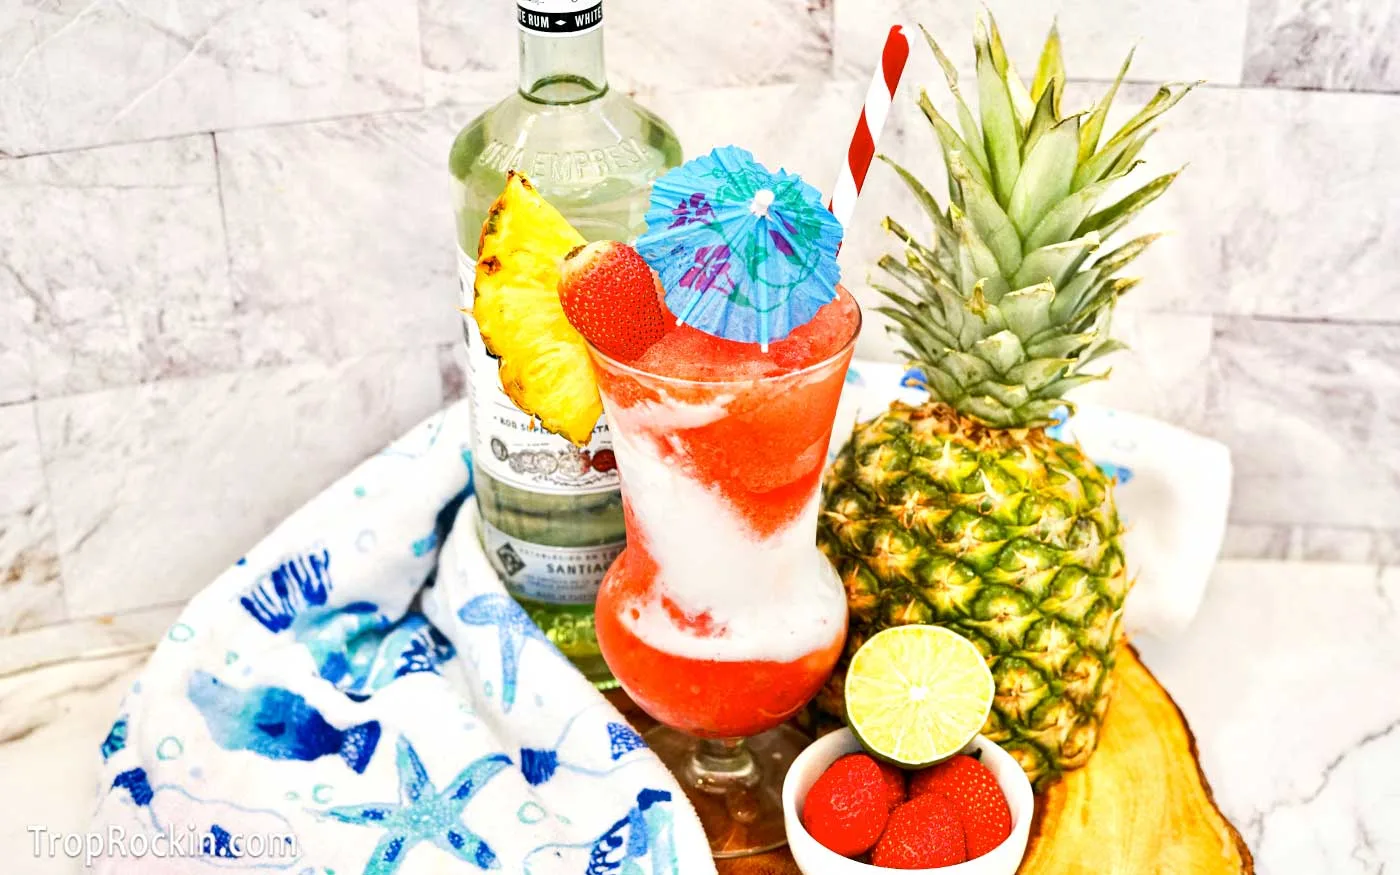 Miami Vice Drink in a hurricane glass with a tropical drink umbrella. Garnished with a slice of pineapple and fresh strawberry. Bottle of Bacardi Light Rum, a fresh pineapple in the background. A bowl of cherries and a half lime in the front.